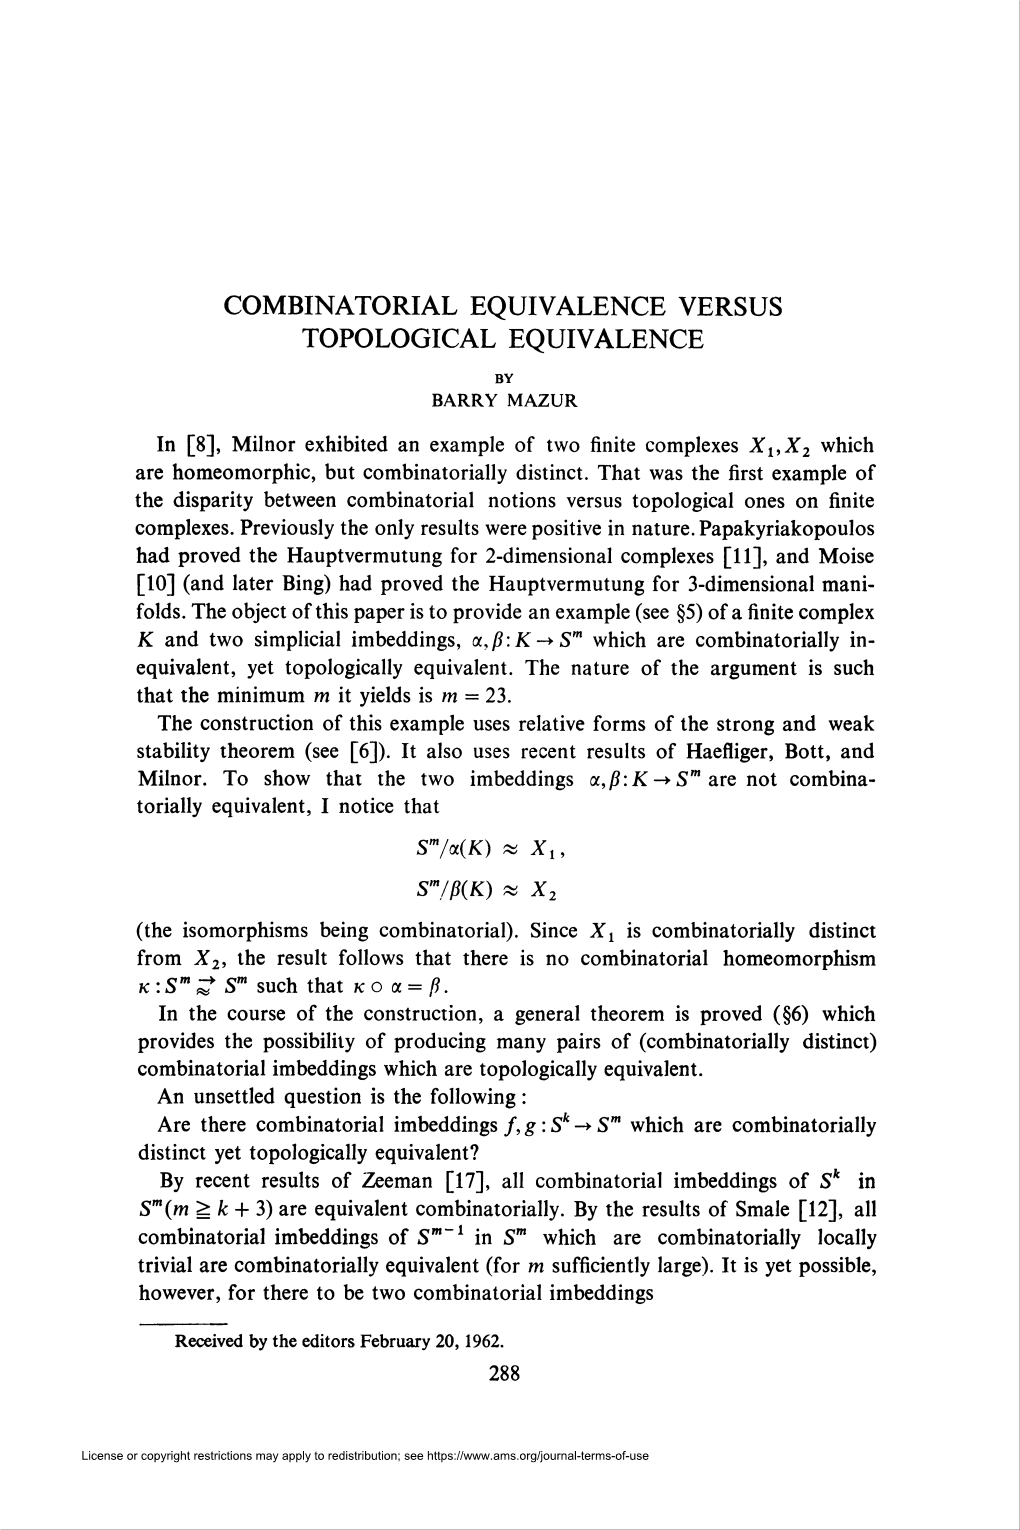 Topological Equivalence Between a and ß